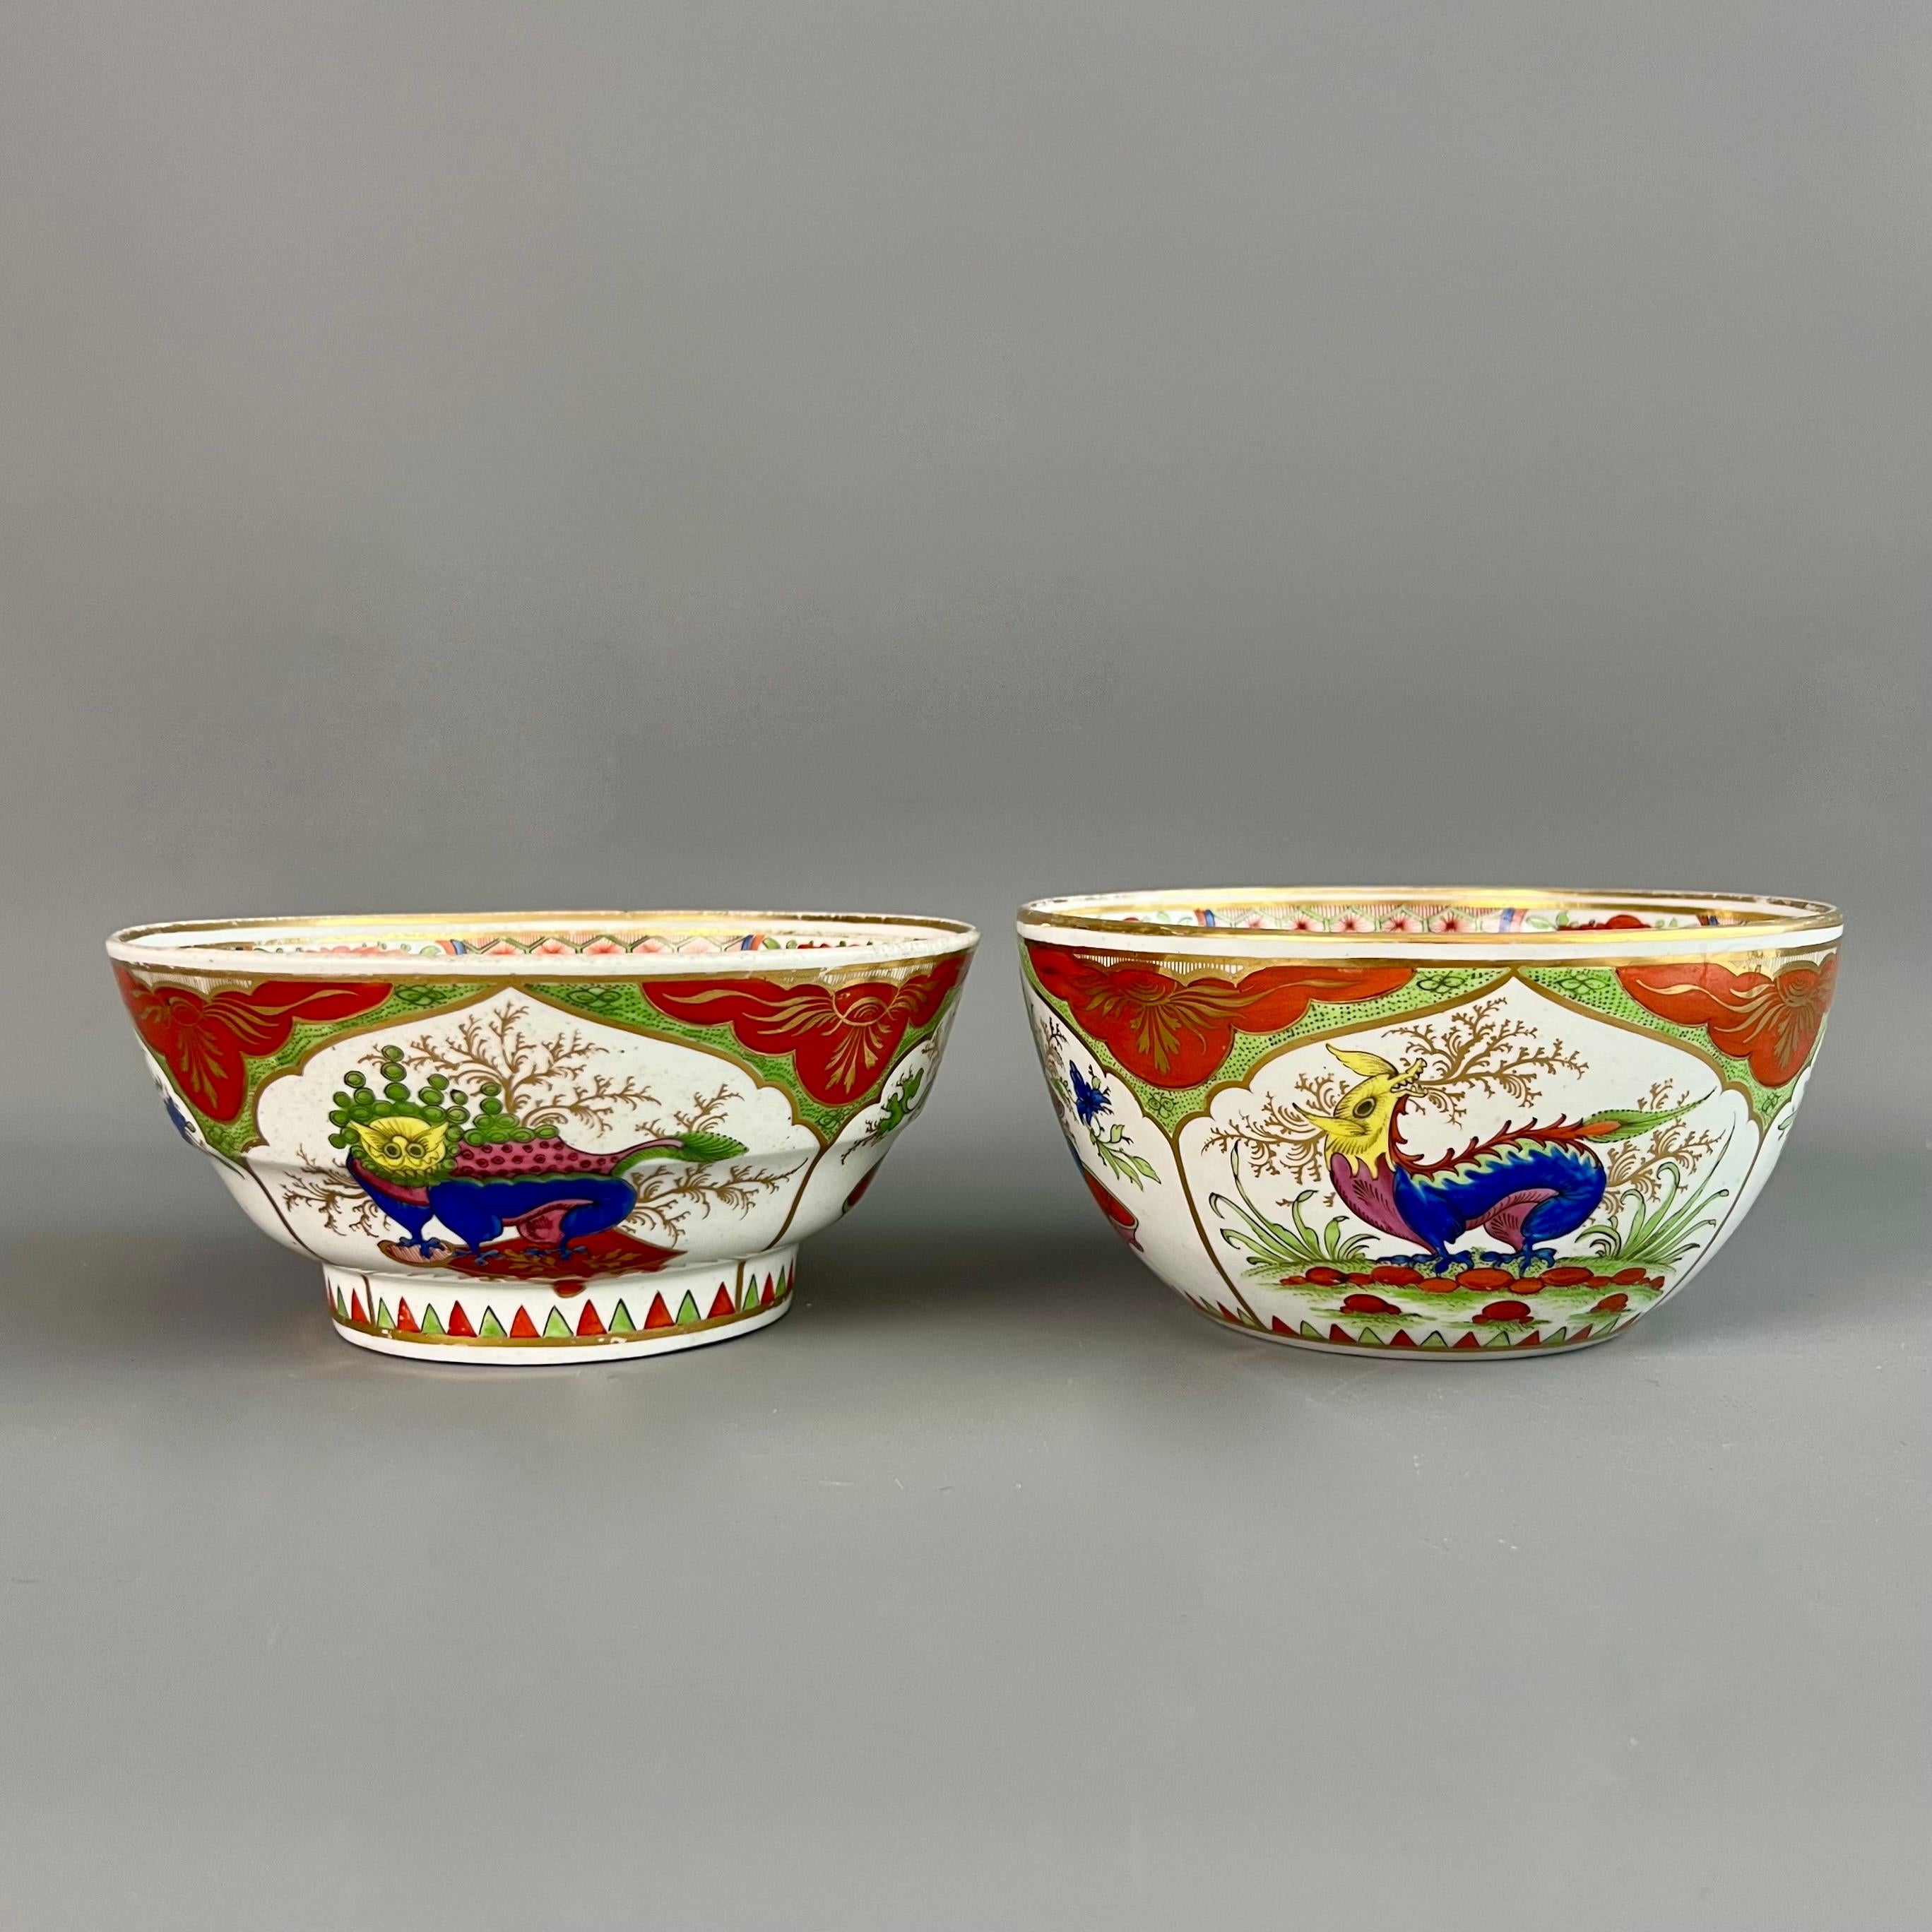 Chamberlain's Worcester Dessert Service Kylin / Dragons in Compartments, ca 1795 4